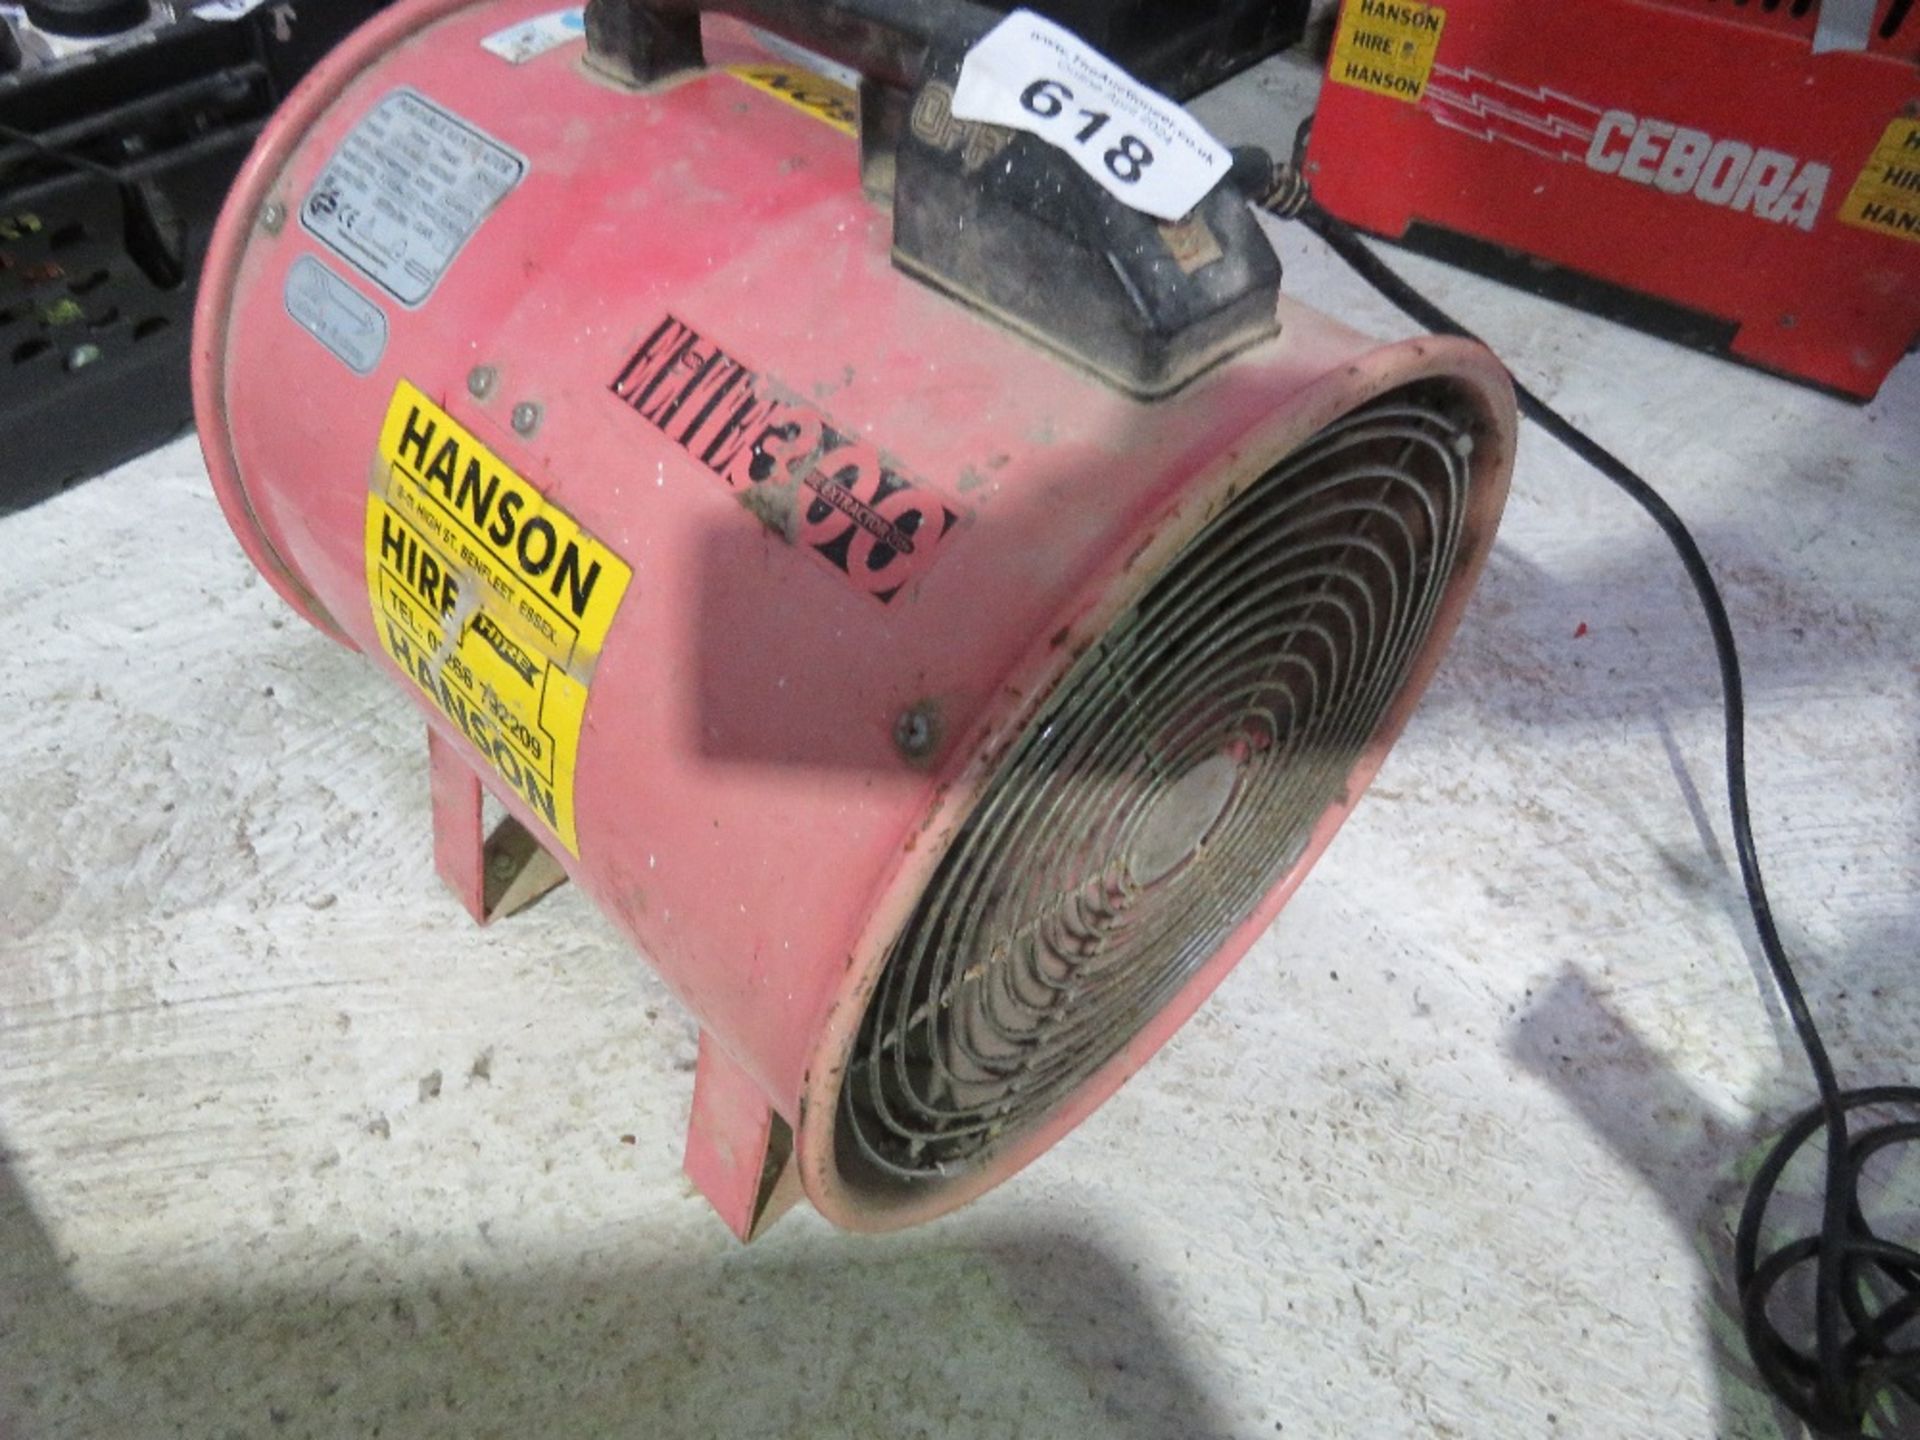 AIR CIRCULATION FAN, 110VOLT POWERED.....THIS LOT IS SOLD UNDER THE AUCTIONEERS MARGIN SCHEME, THERE